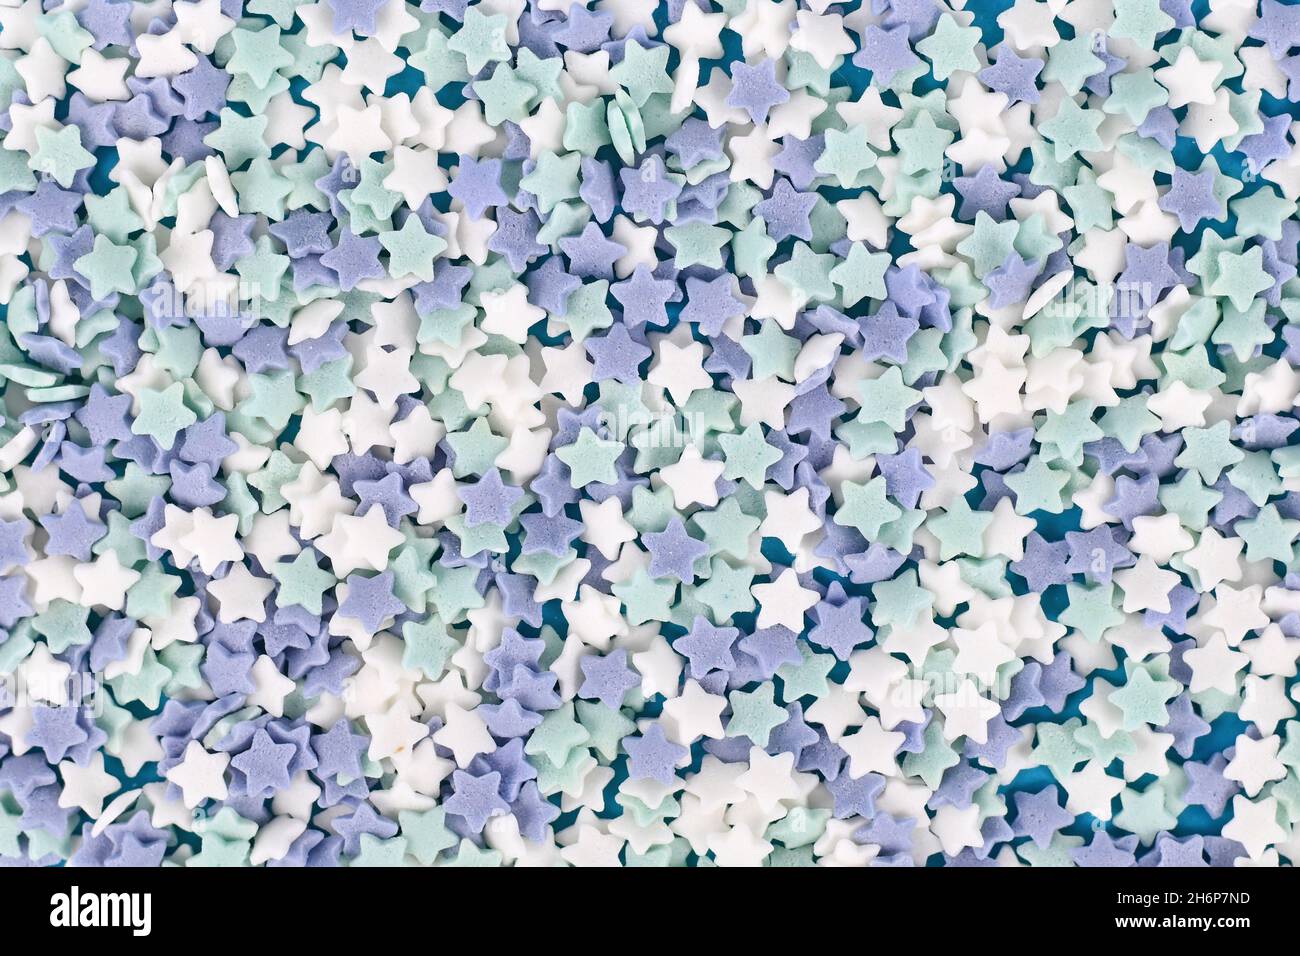 Star shaped sugar sprinkles with blue, teal and white color Stock Photo